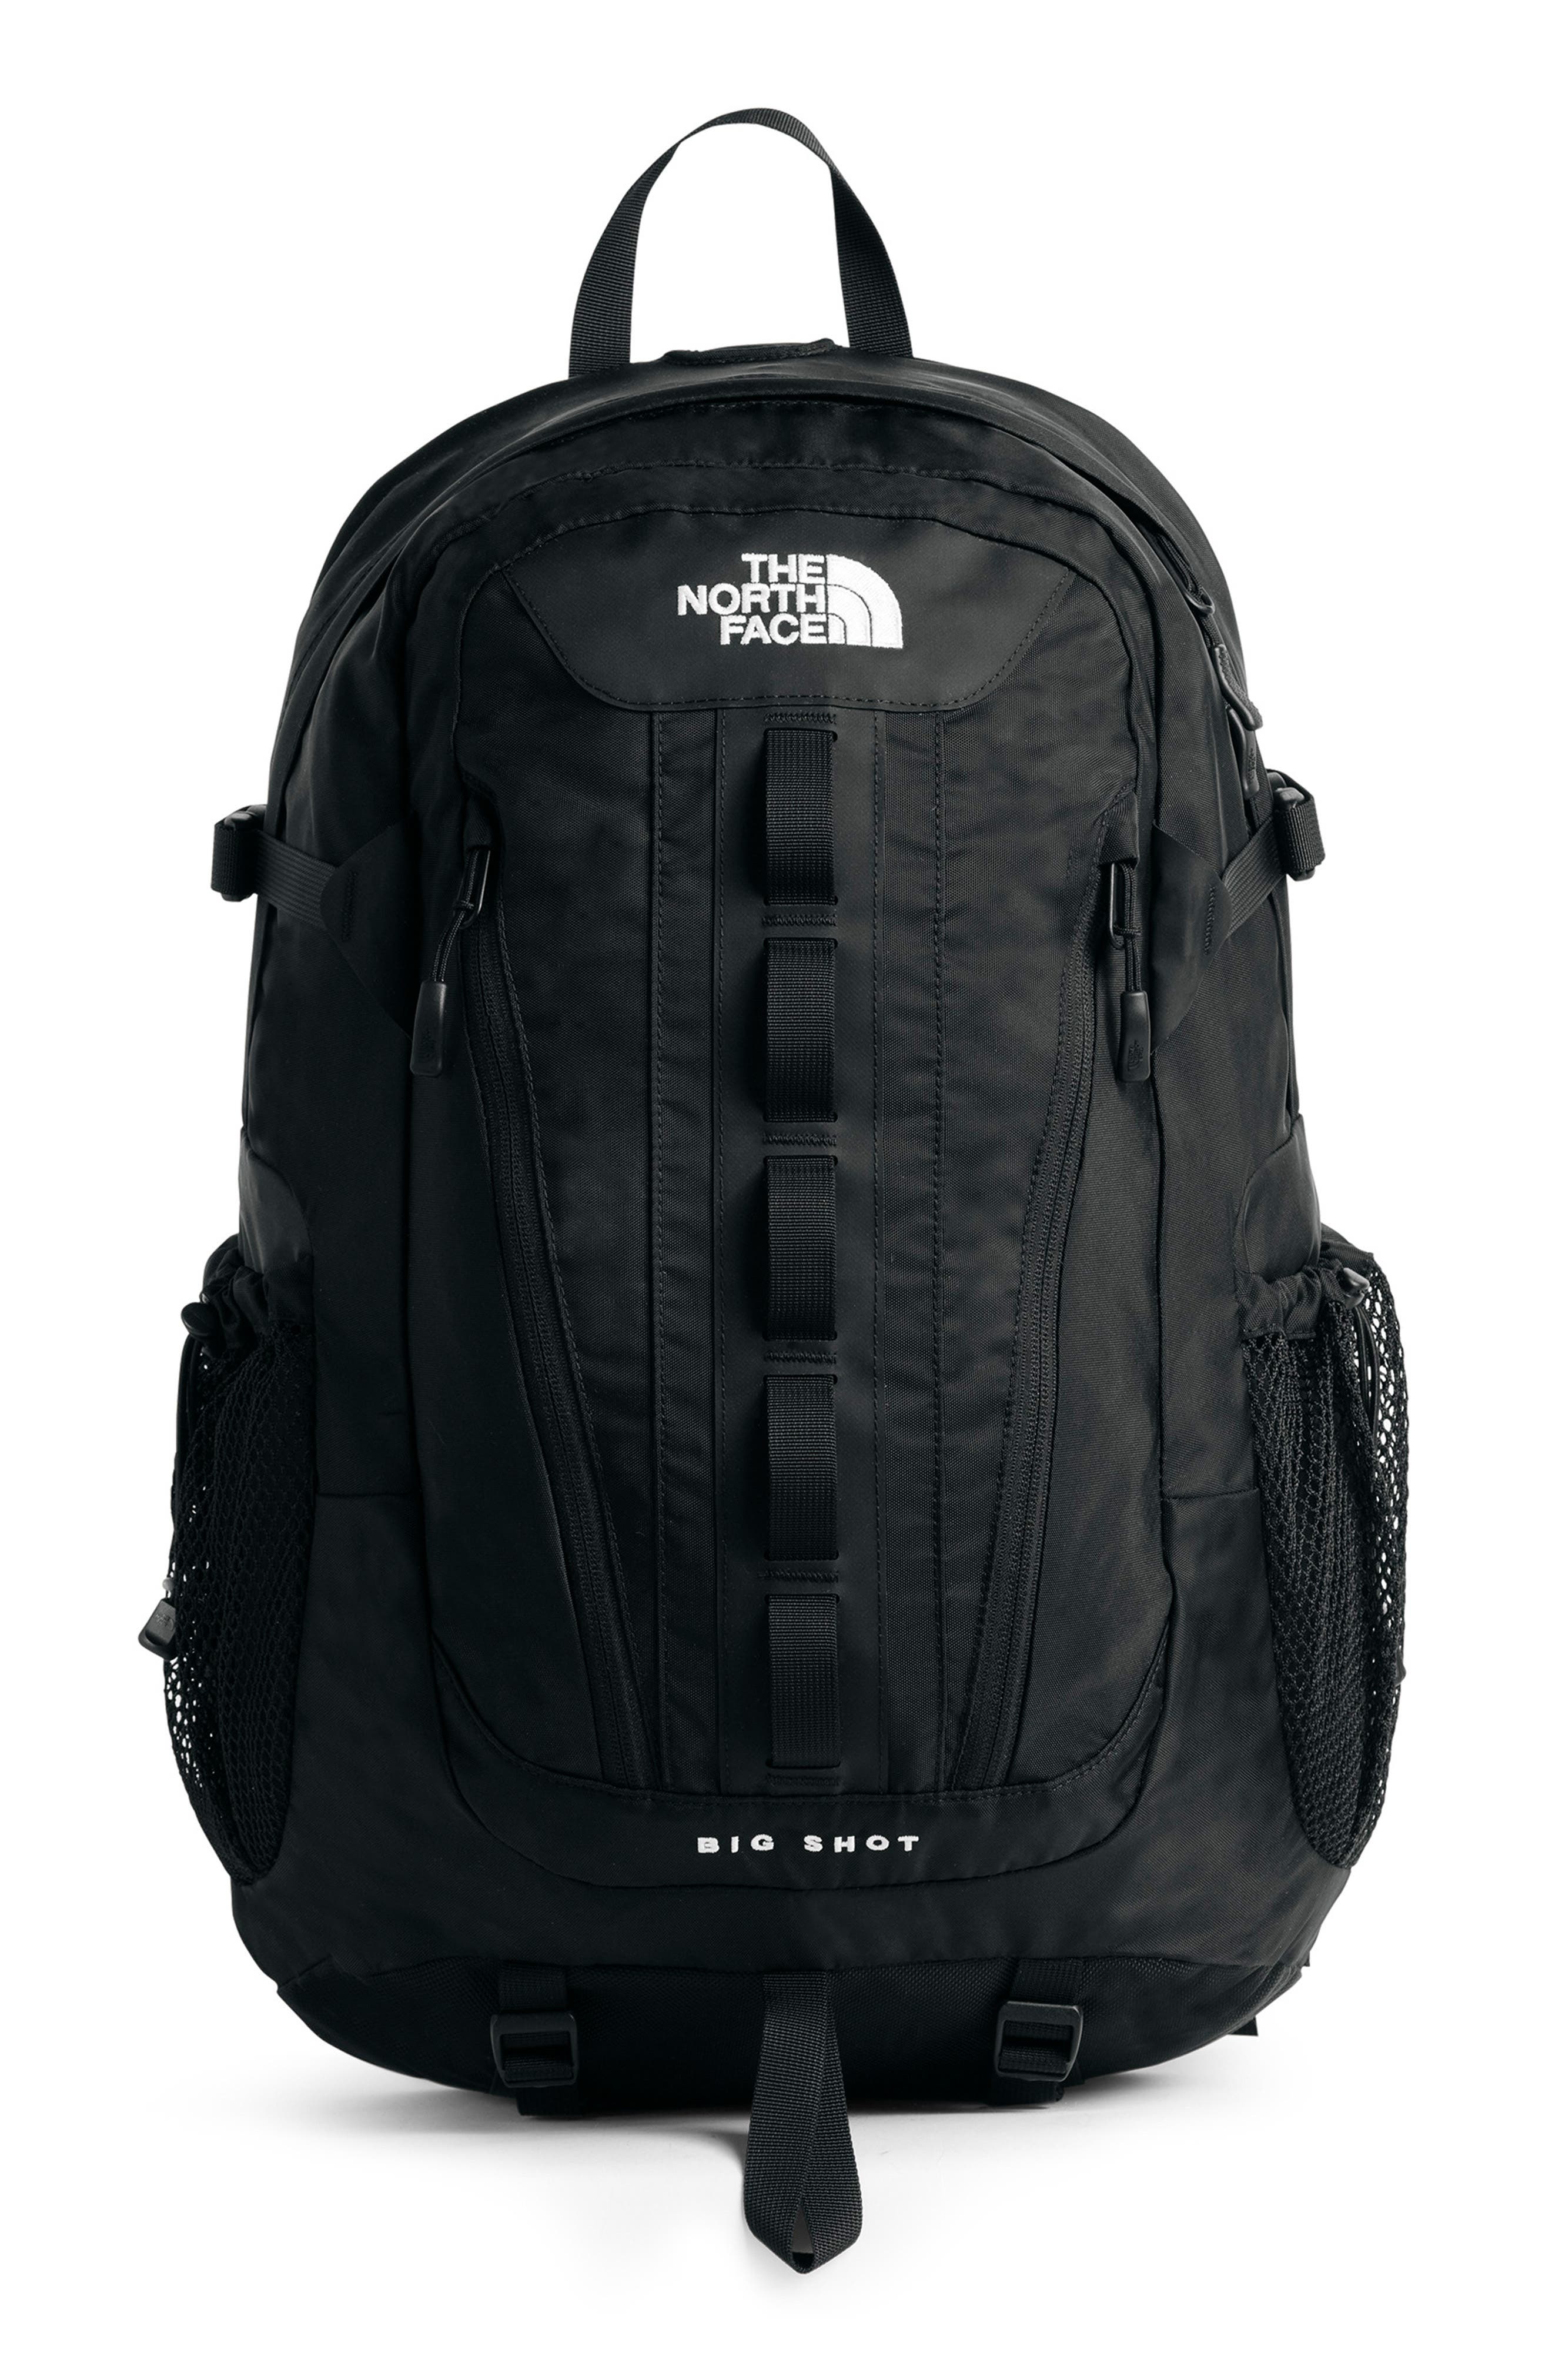 the north face big shot backpack